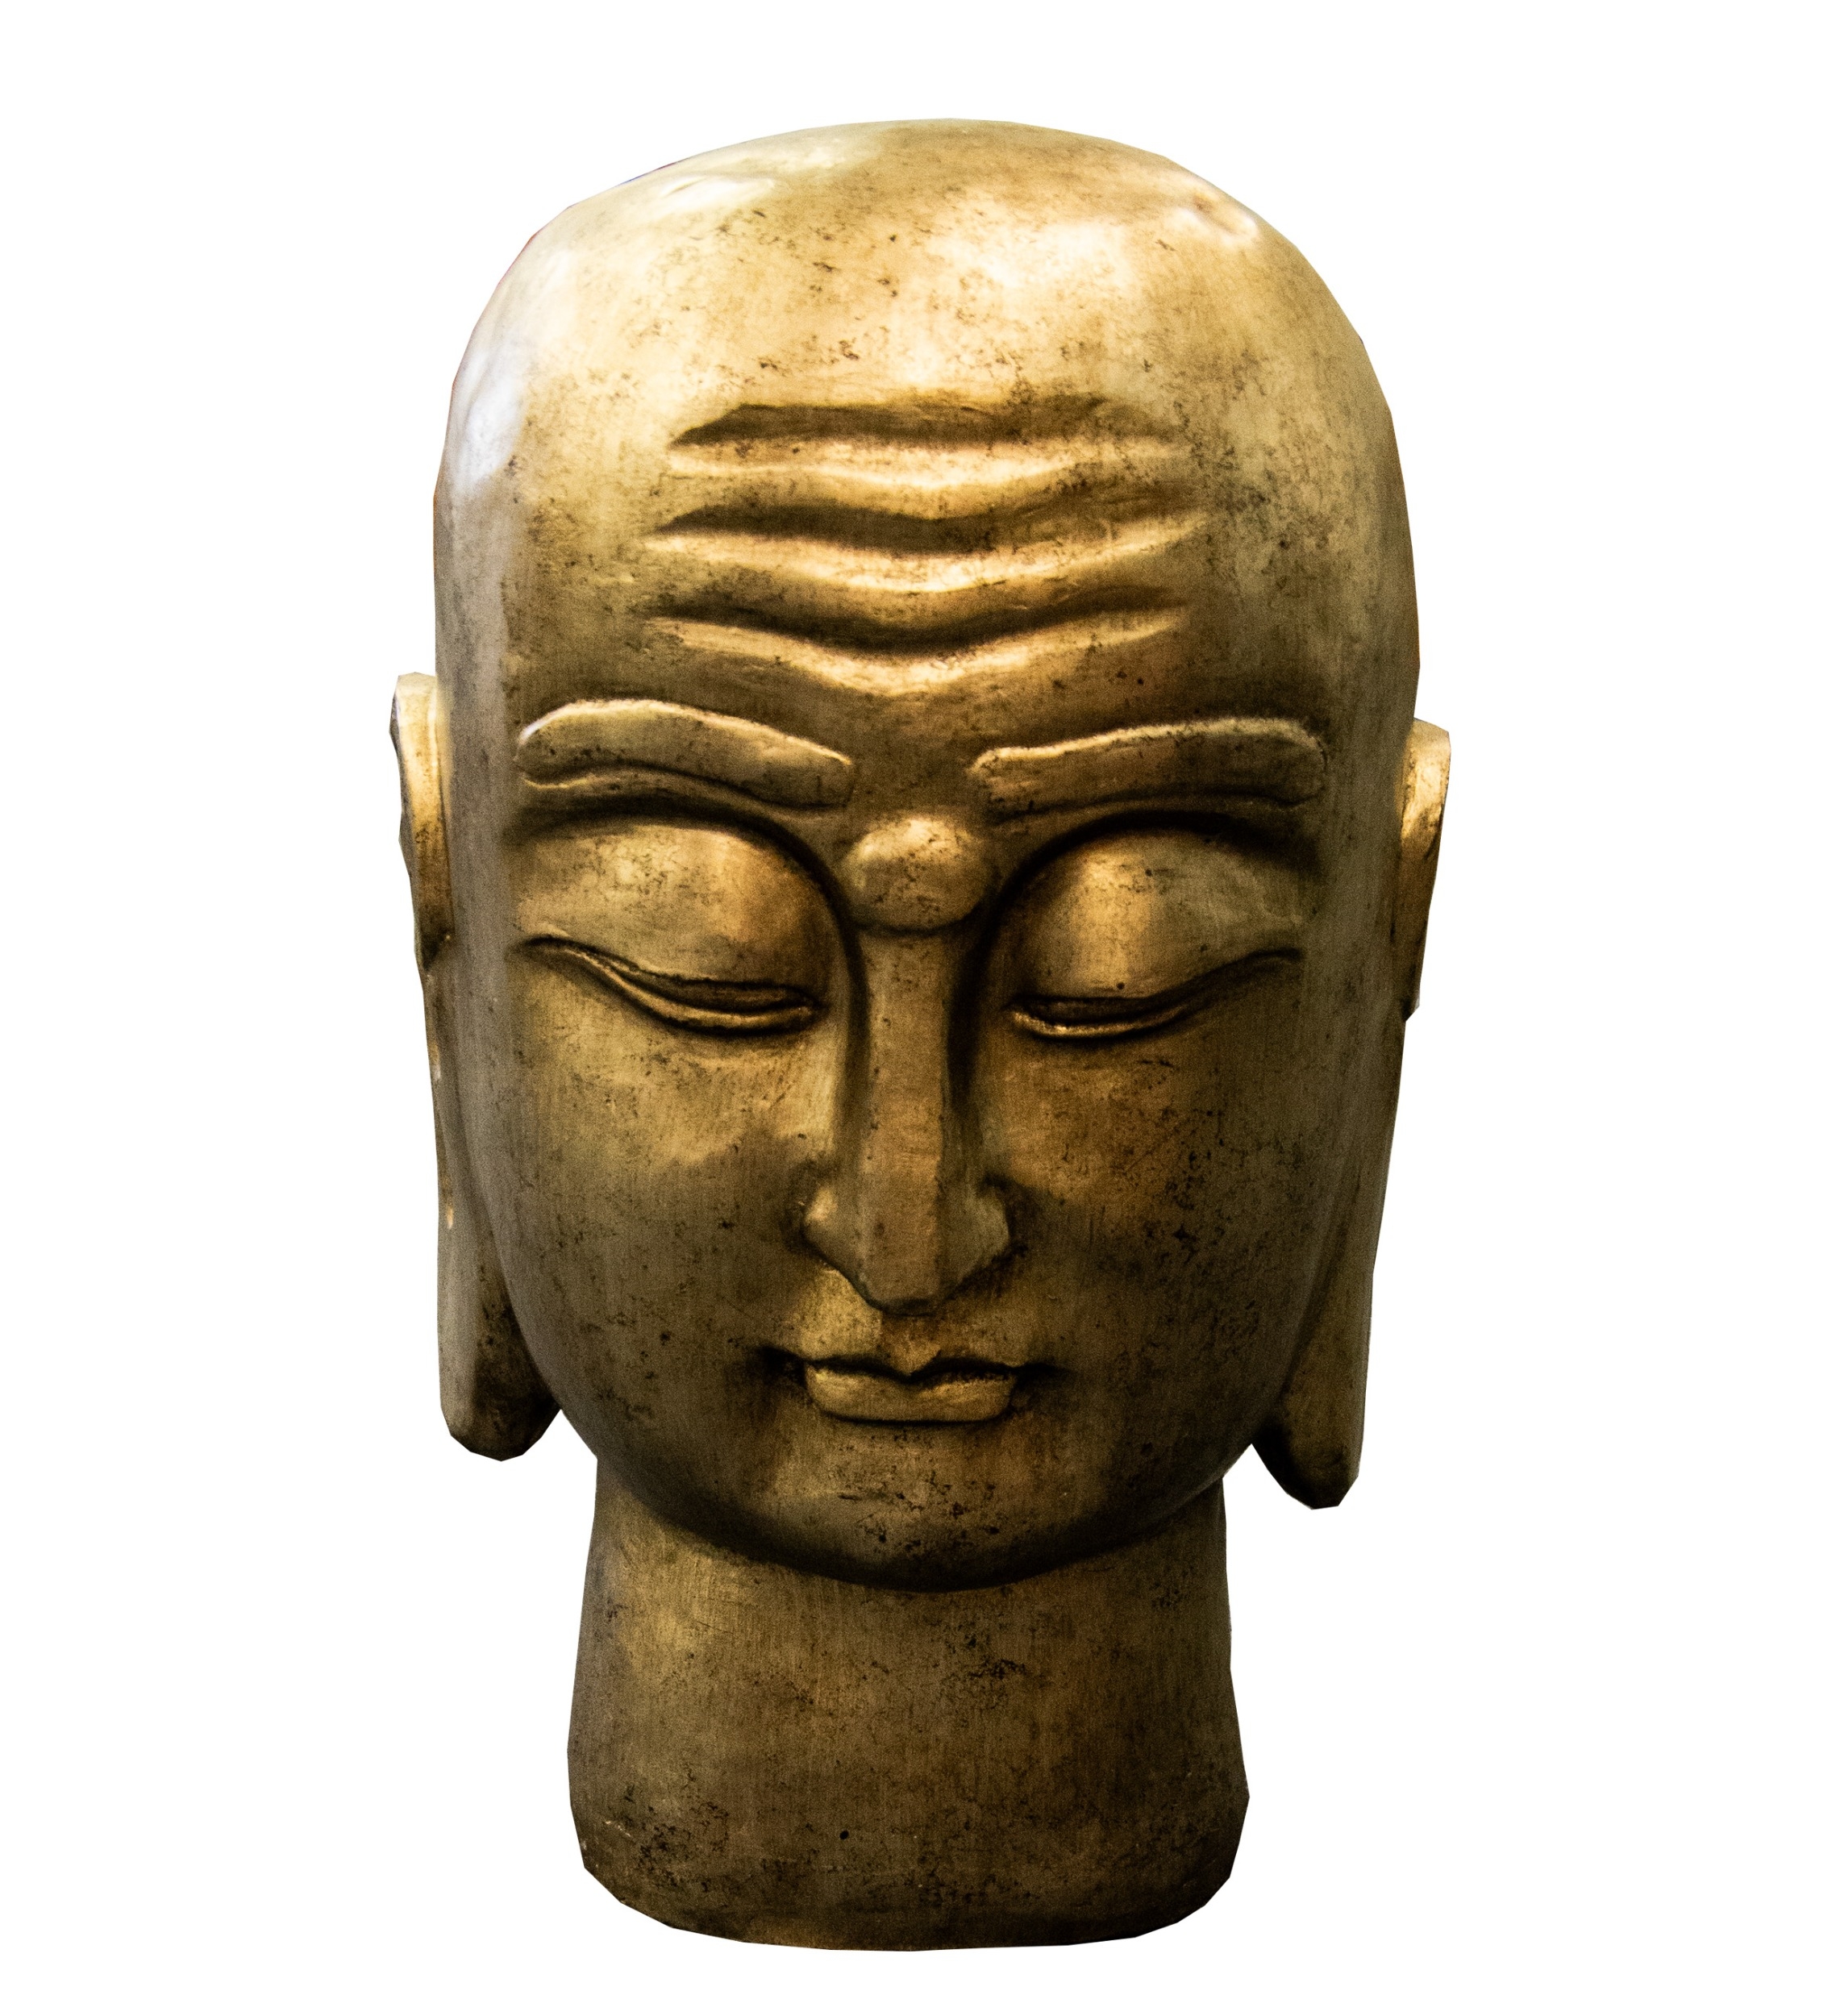 PARLANE SILVER GILT RESIN BUDDHAS HEAD, typically modelled, 30” (76.2cm) high, label to the base